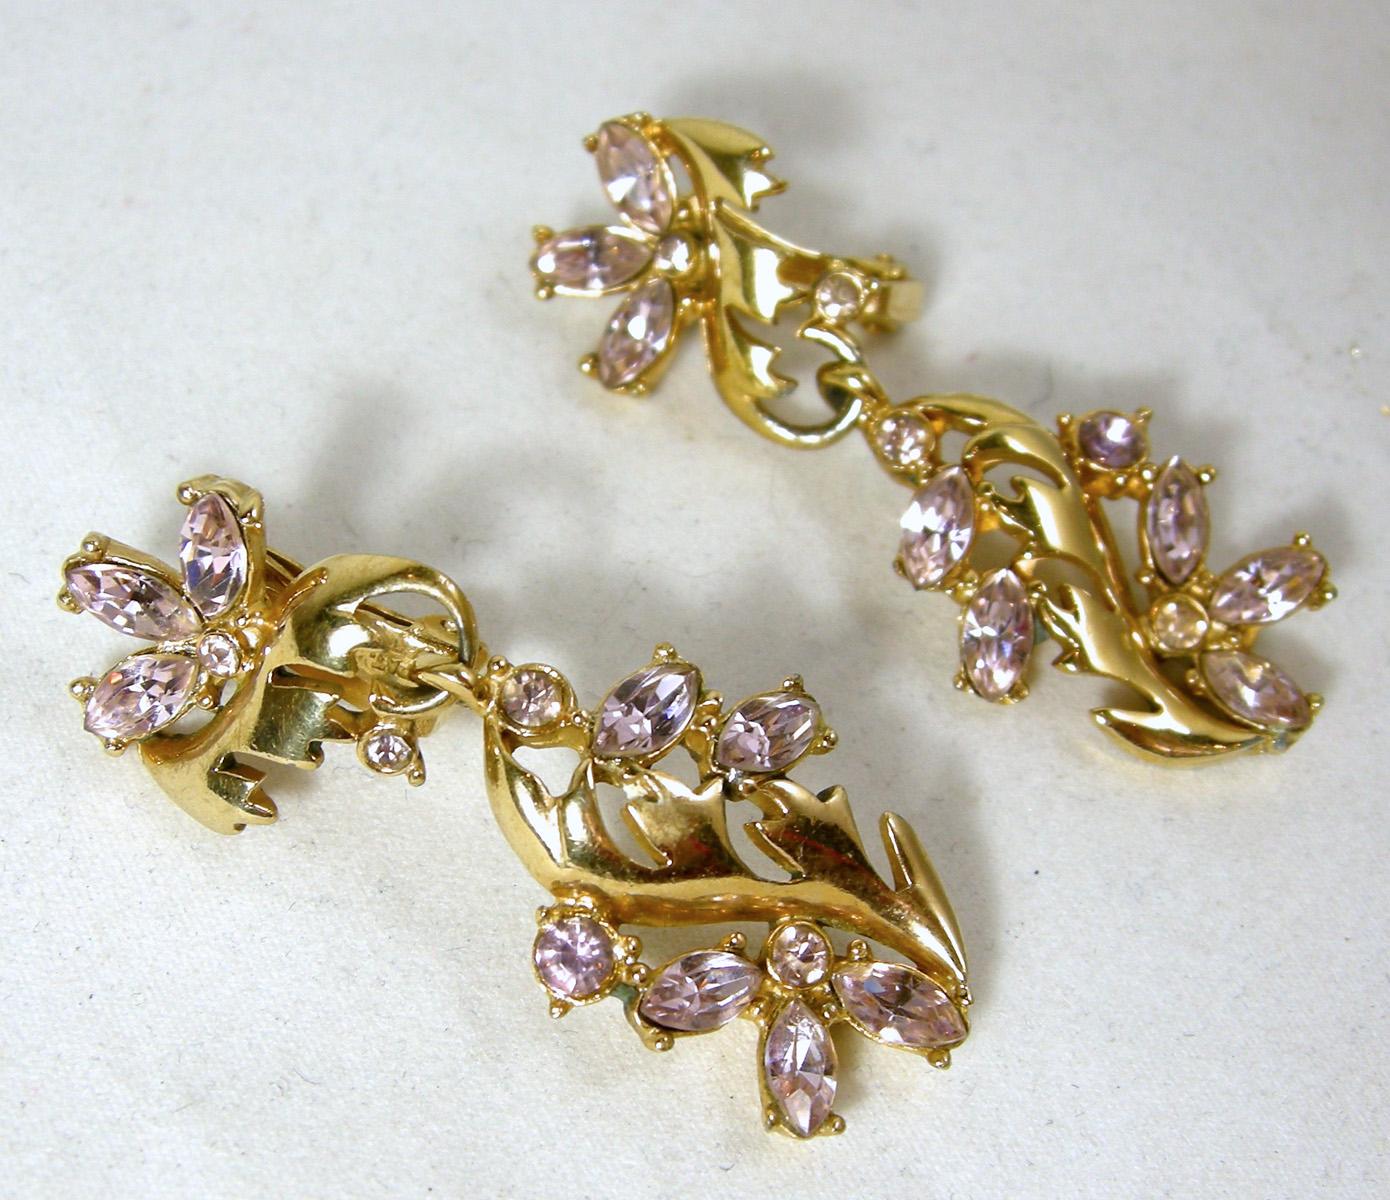 These beautiful Hollycraft dangling clip earrings have light amethyst color rhinestones in a floral design on top.  Dangling below is a gold tone leaf design with more faux amethyst flowers.  They measure 1-7/8” long x 5/8” wide.  They are signed